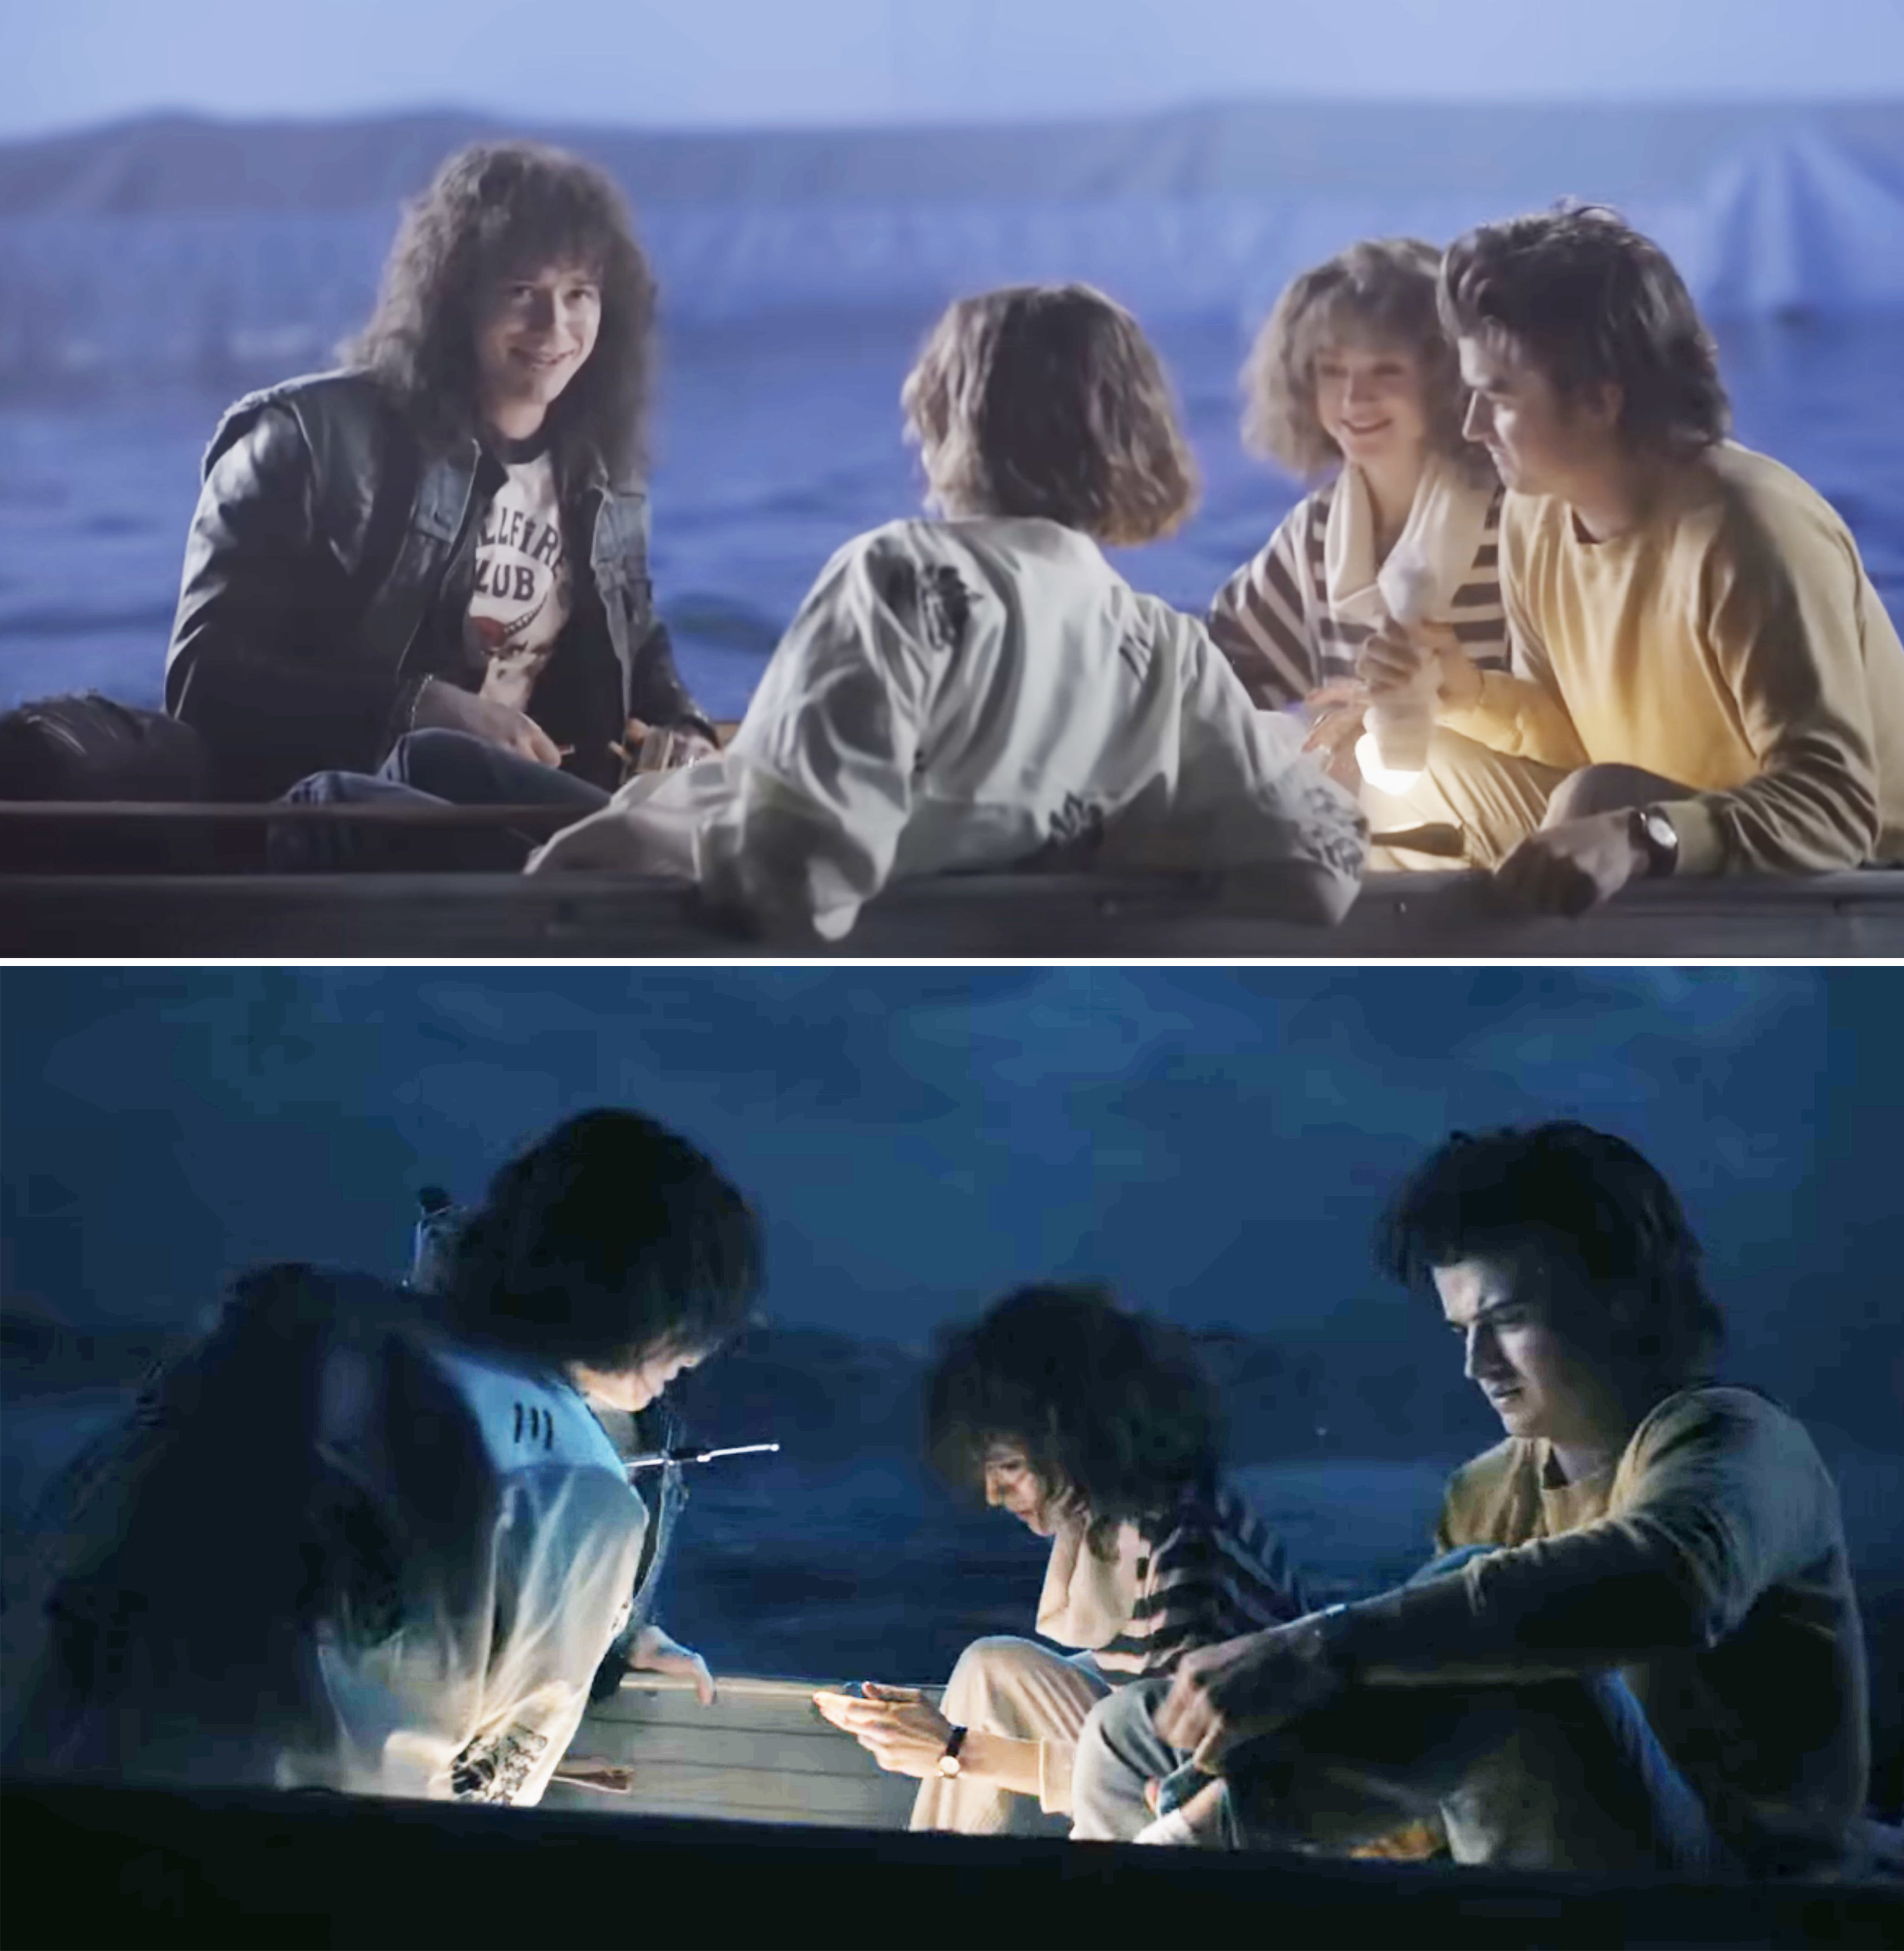 Joseph Quinn, Maya Hawke, Natalia Dyer, and Joe Keery shooting a moment in the boat in &quot;Stranger Things&quot;